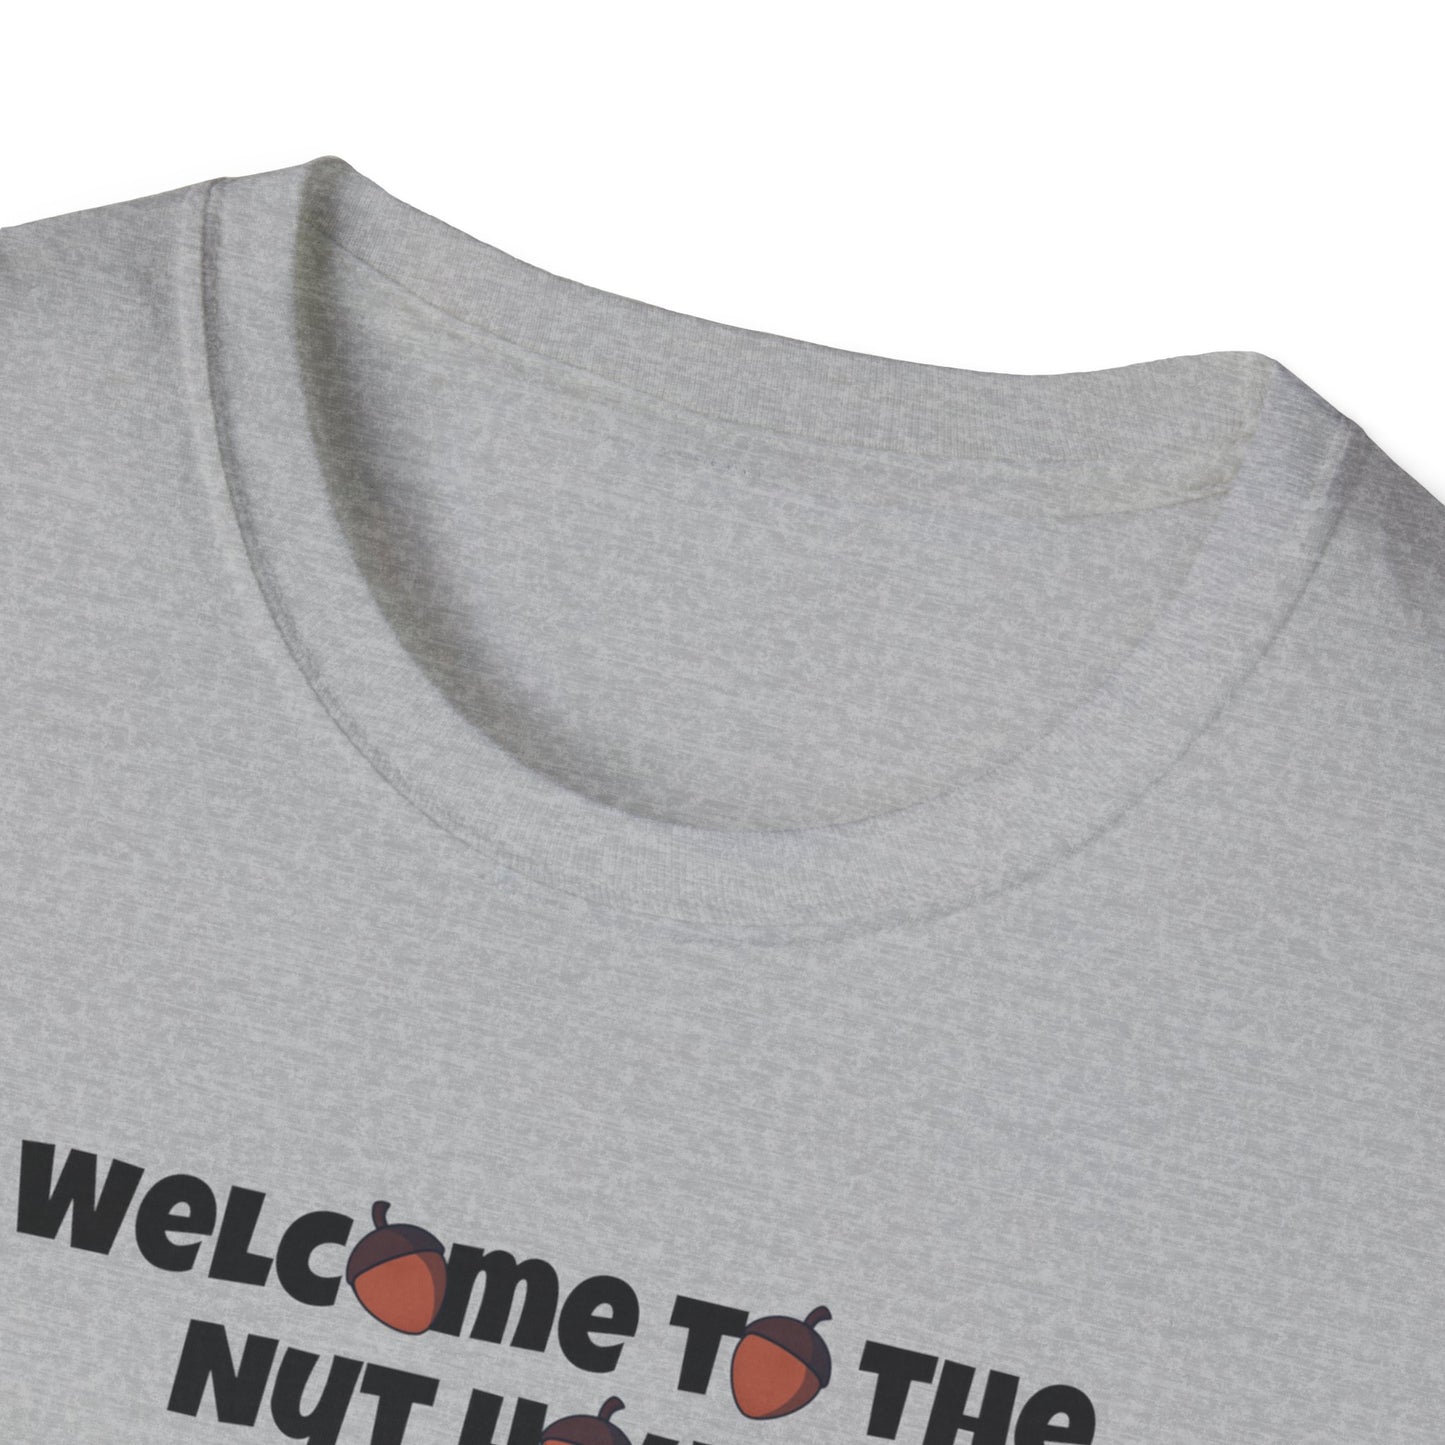 Welcome to THE NUT HOUSE - Unisex Softstyle T-Shirt